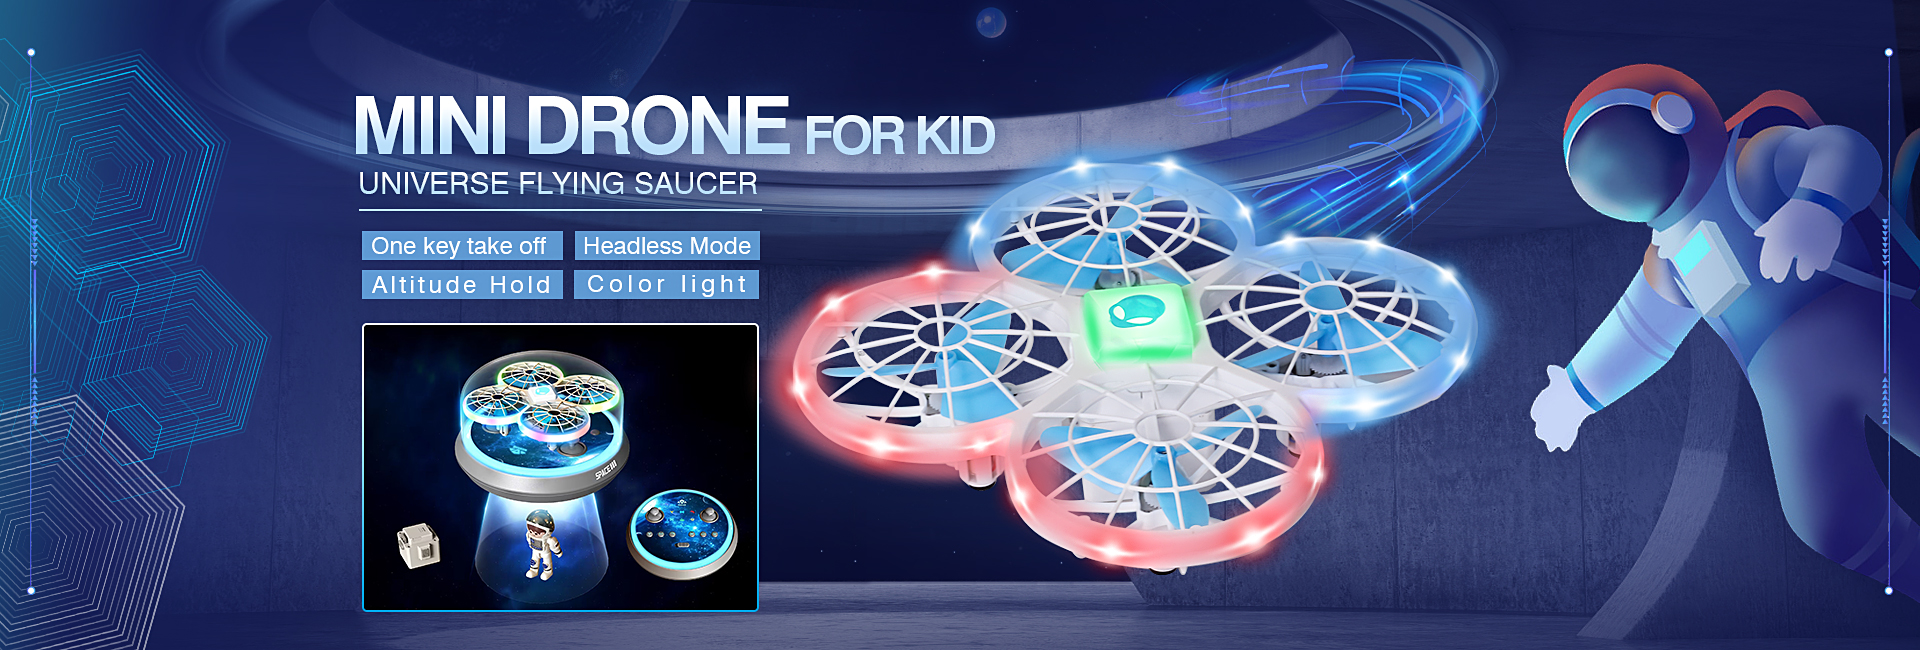 Flying Saucer Mini RC Quadcopter